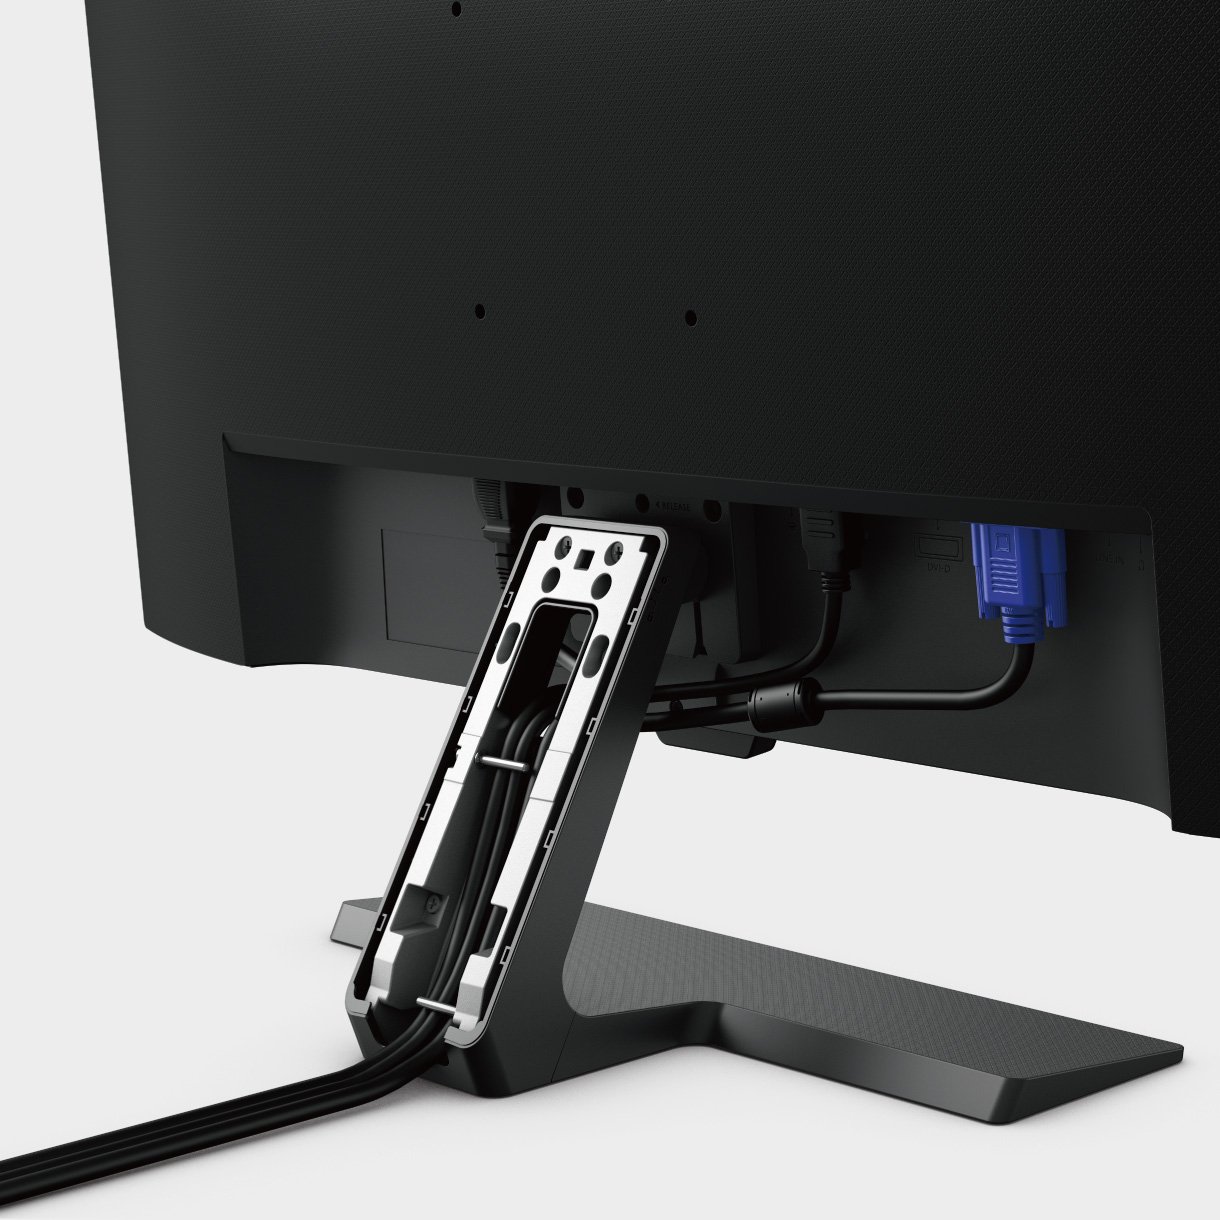 benq gw2280 with invisible cable management system hides all wires inside the monitor stand for cleanest look